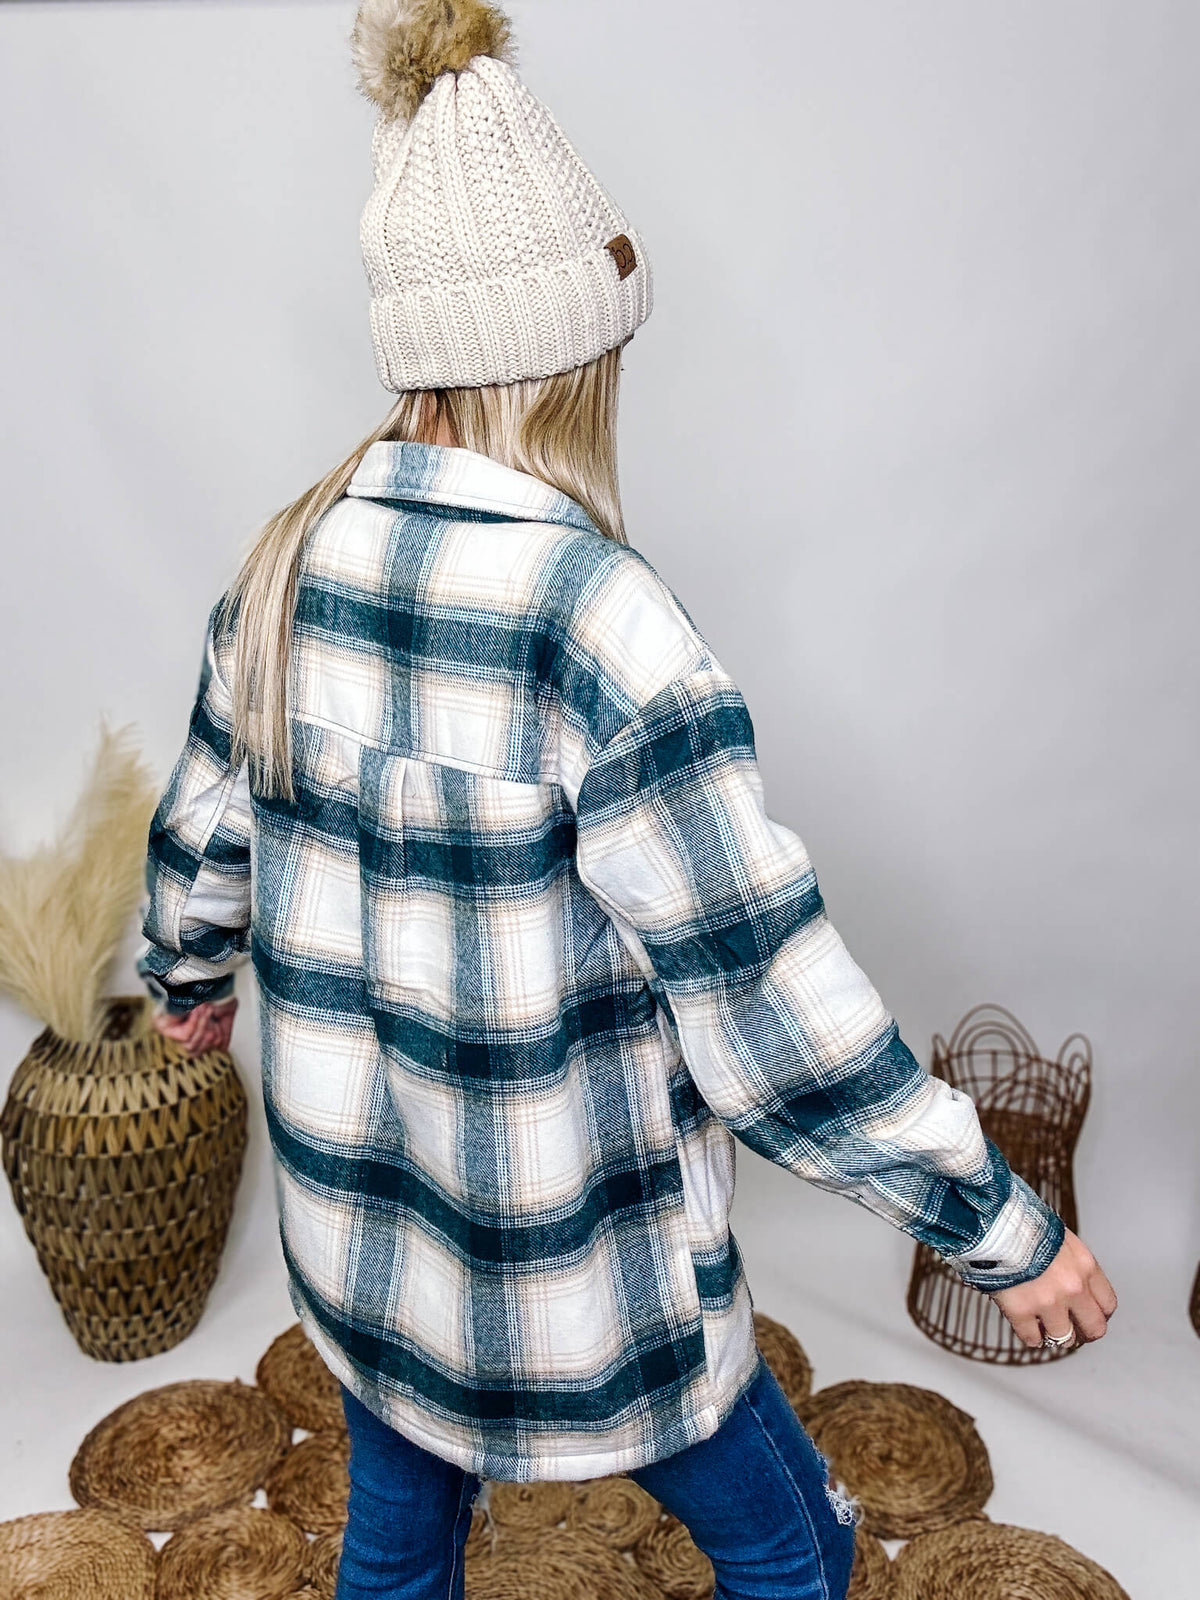 Love Tree Teal Blue Plaid Sherpa Fleece Lined Button Up Jacket Chest Pockets Side Pockets Oversized FitLove Tree Teal Blue Plaid Sherpa Fleece Lined Button Up Jacket Chest Pockets Side Pockets Oversized Fit